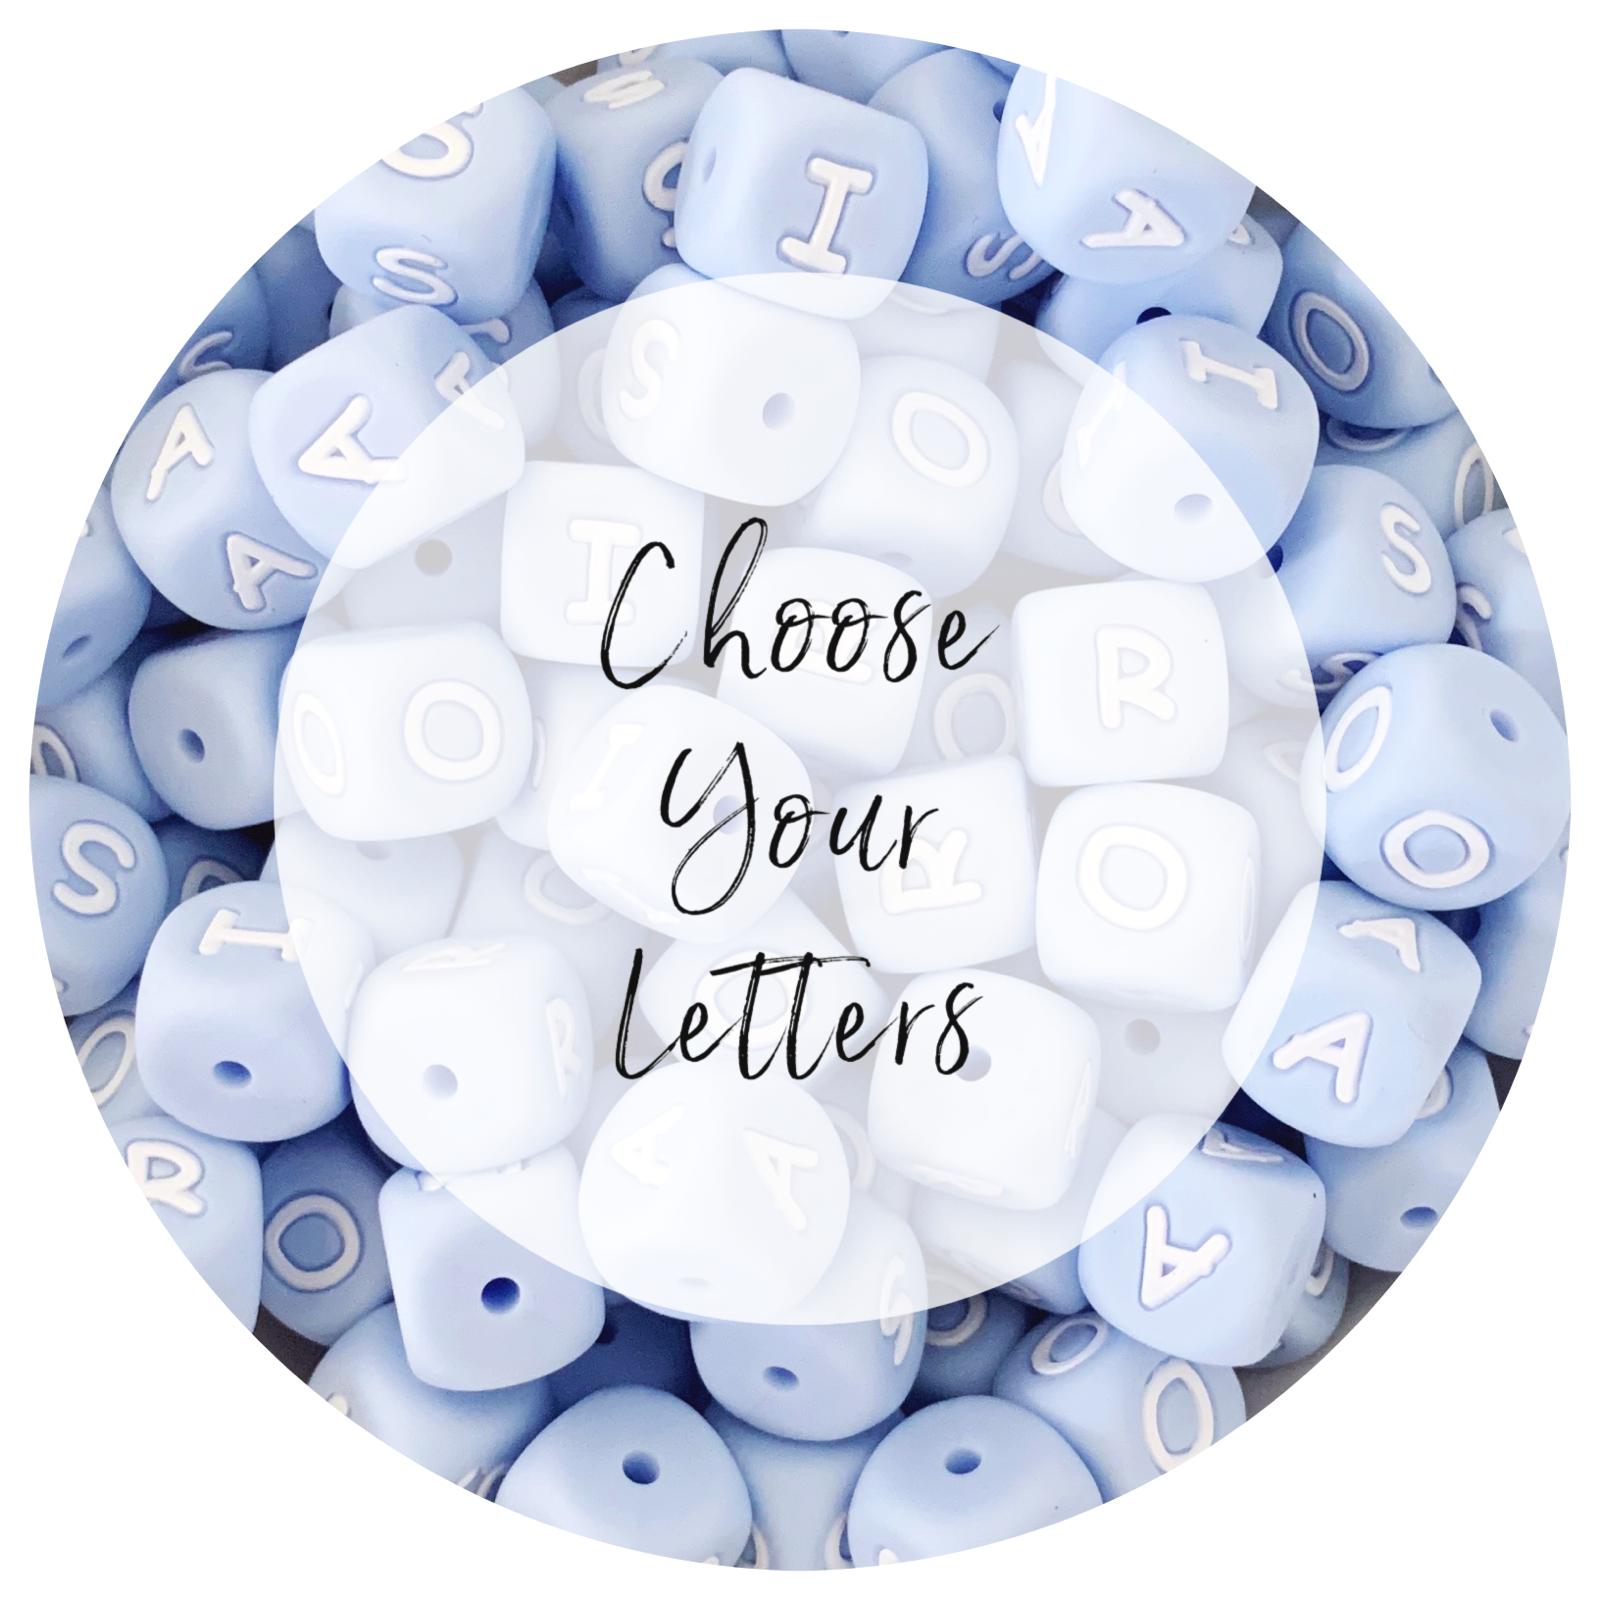 12mm Pastel Blue Silicone Letter Beads - Choose Your Letters - Each